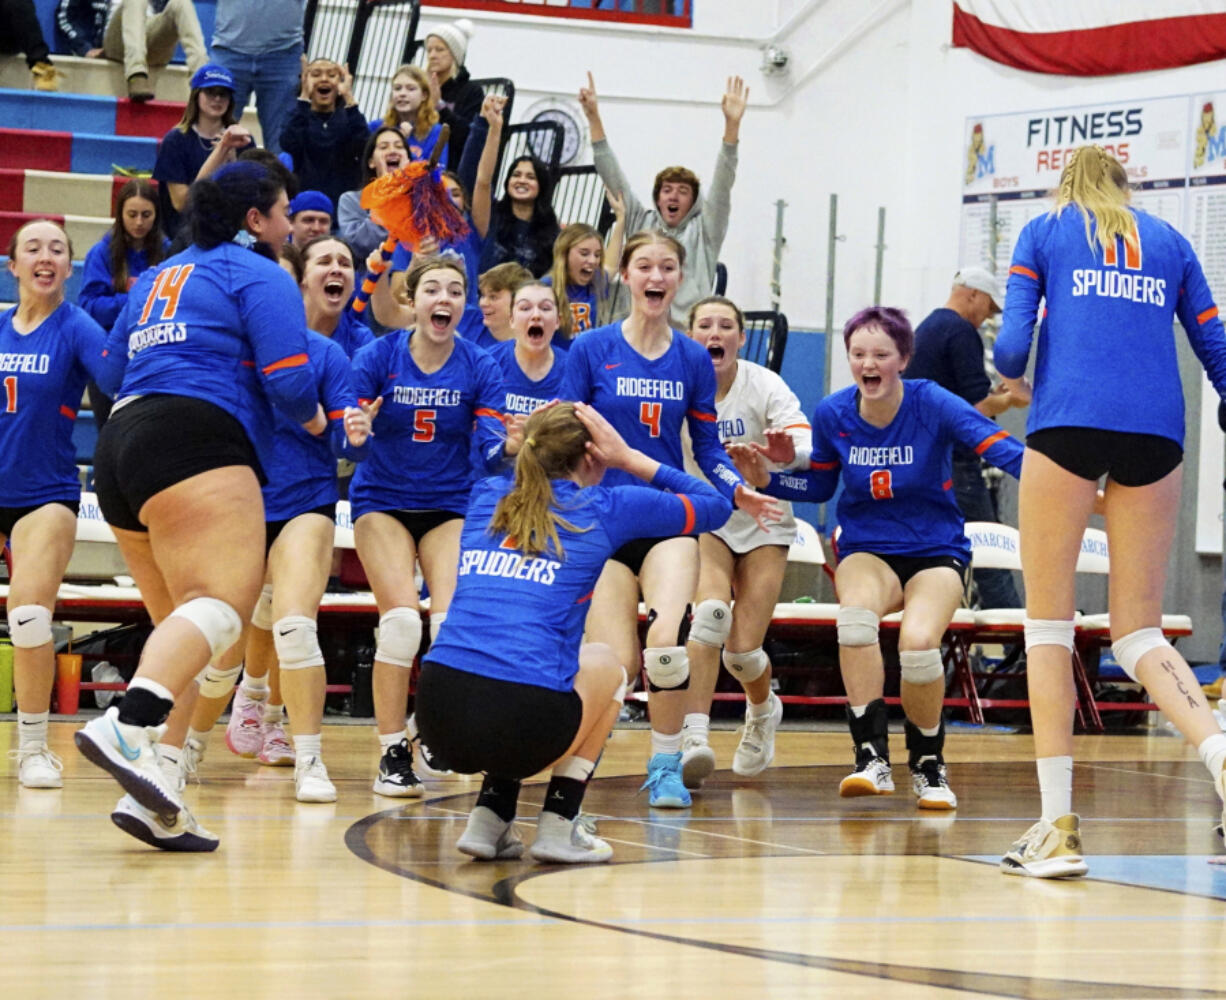 The Ridgefield Spudders celebrate match point, winning the 2A District 4 volleyball championship in five sets against rival Columbia River on Saturday, Nov. 12, 2022, at Mark Morris High School in Longview.